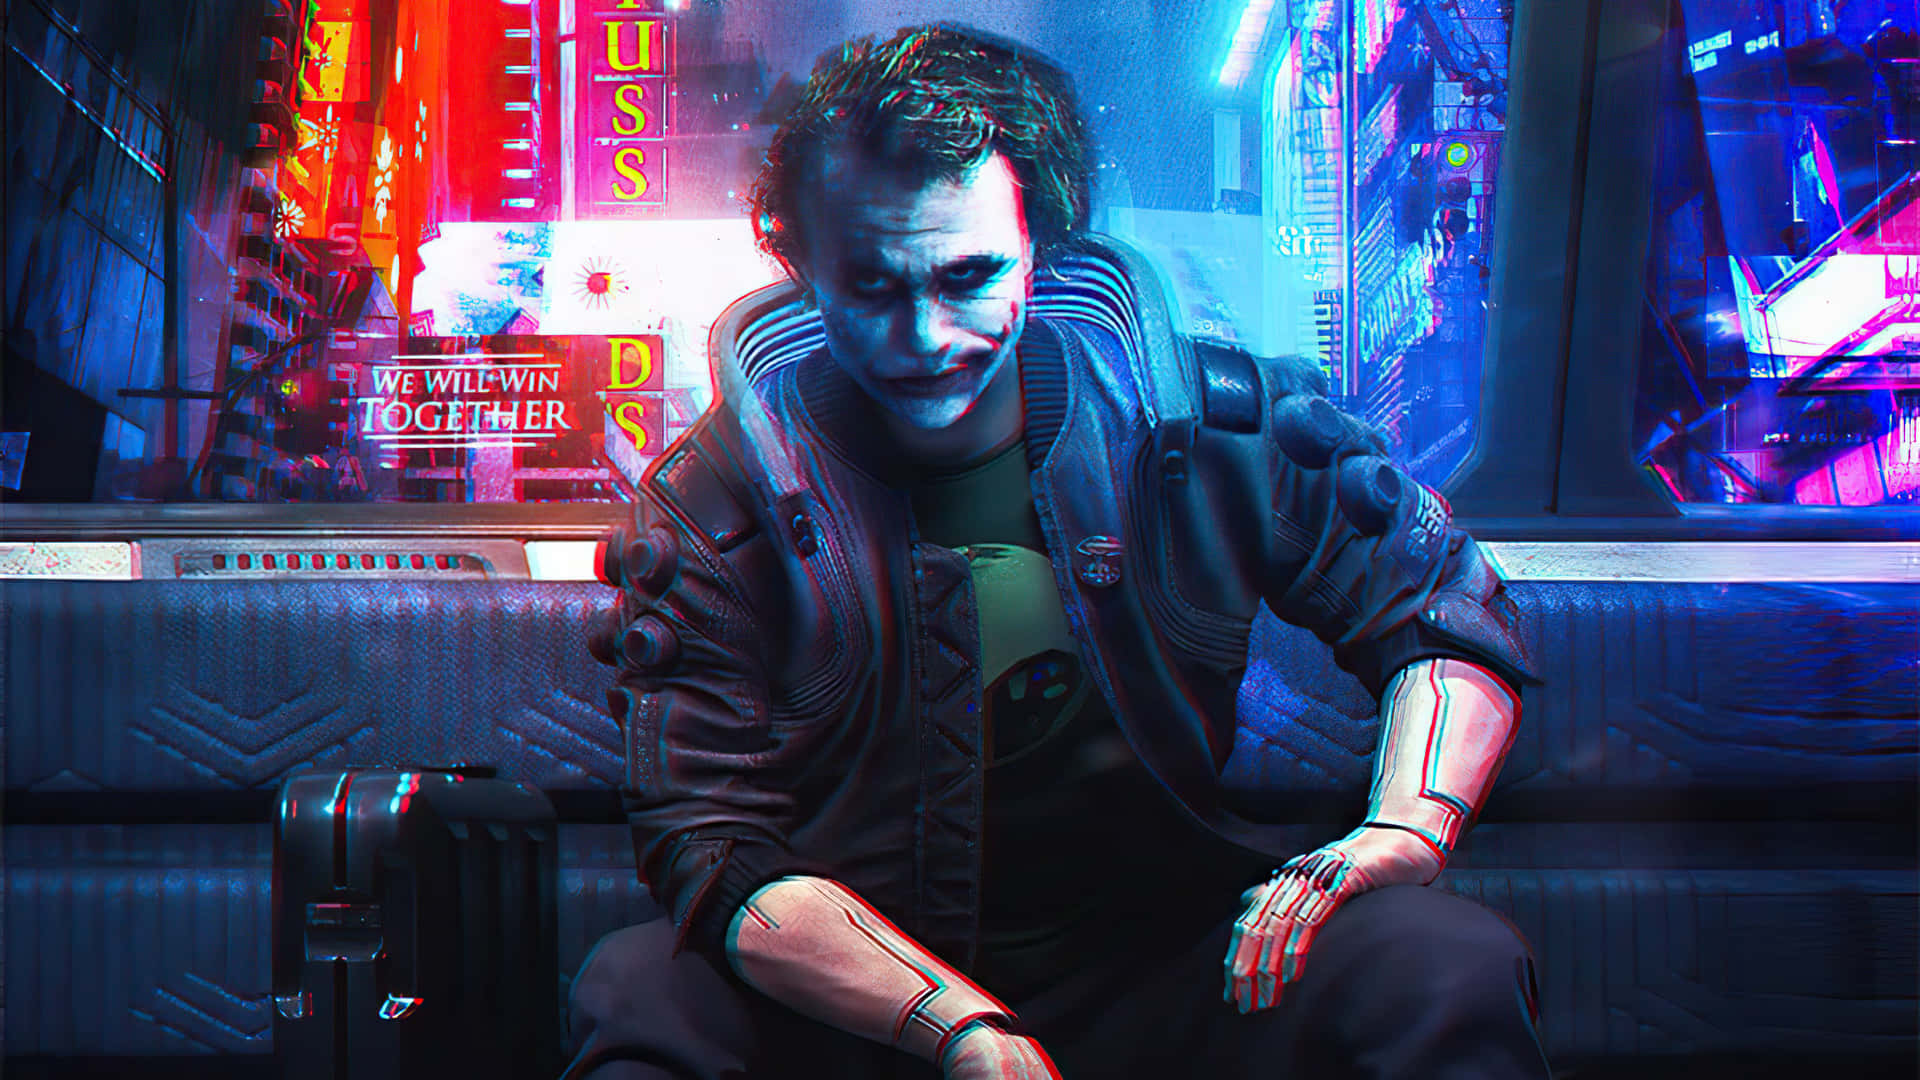 The Sneaky And Stylish Cool Joker Wallpaper